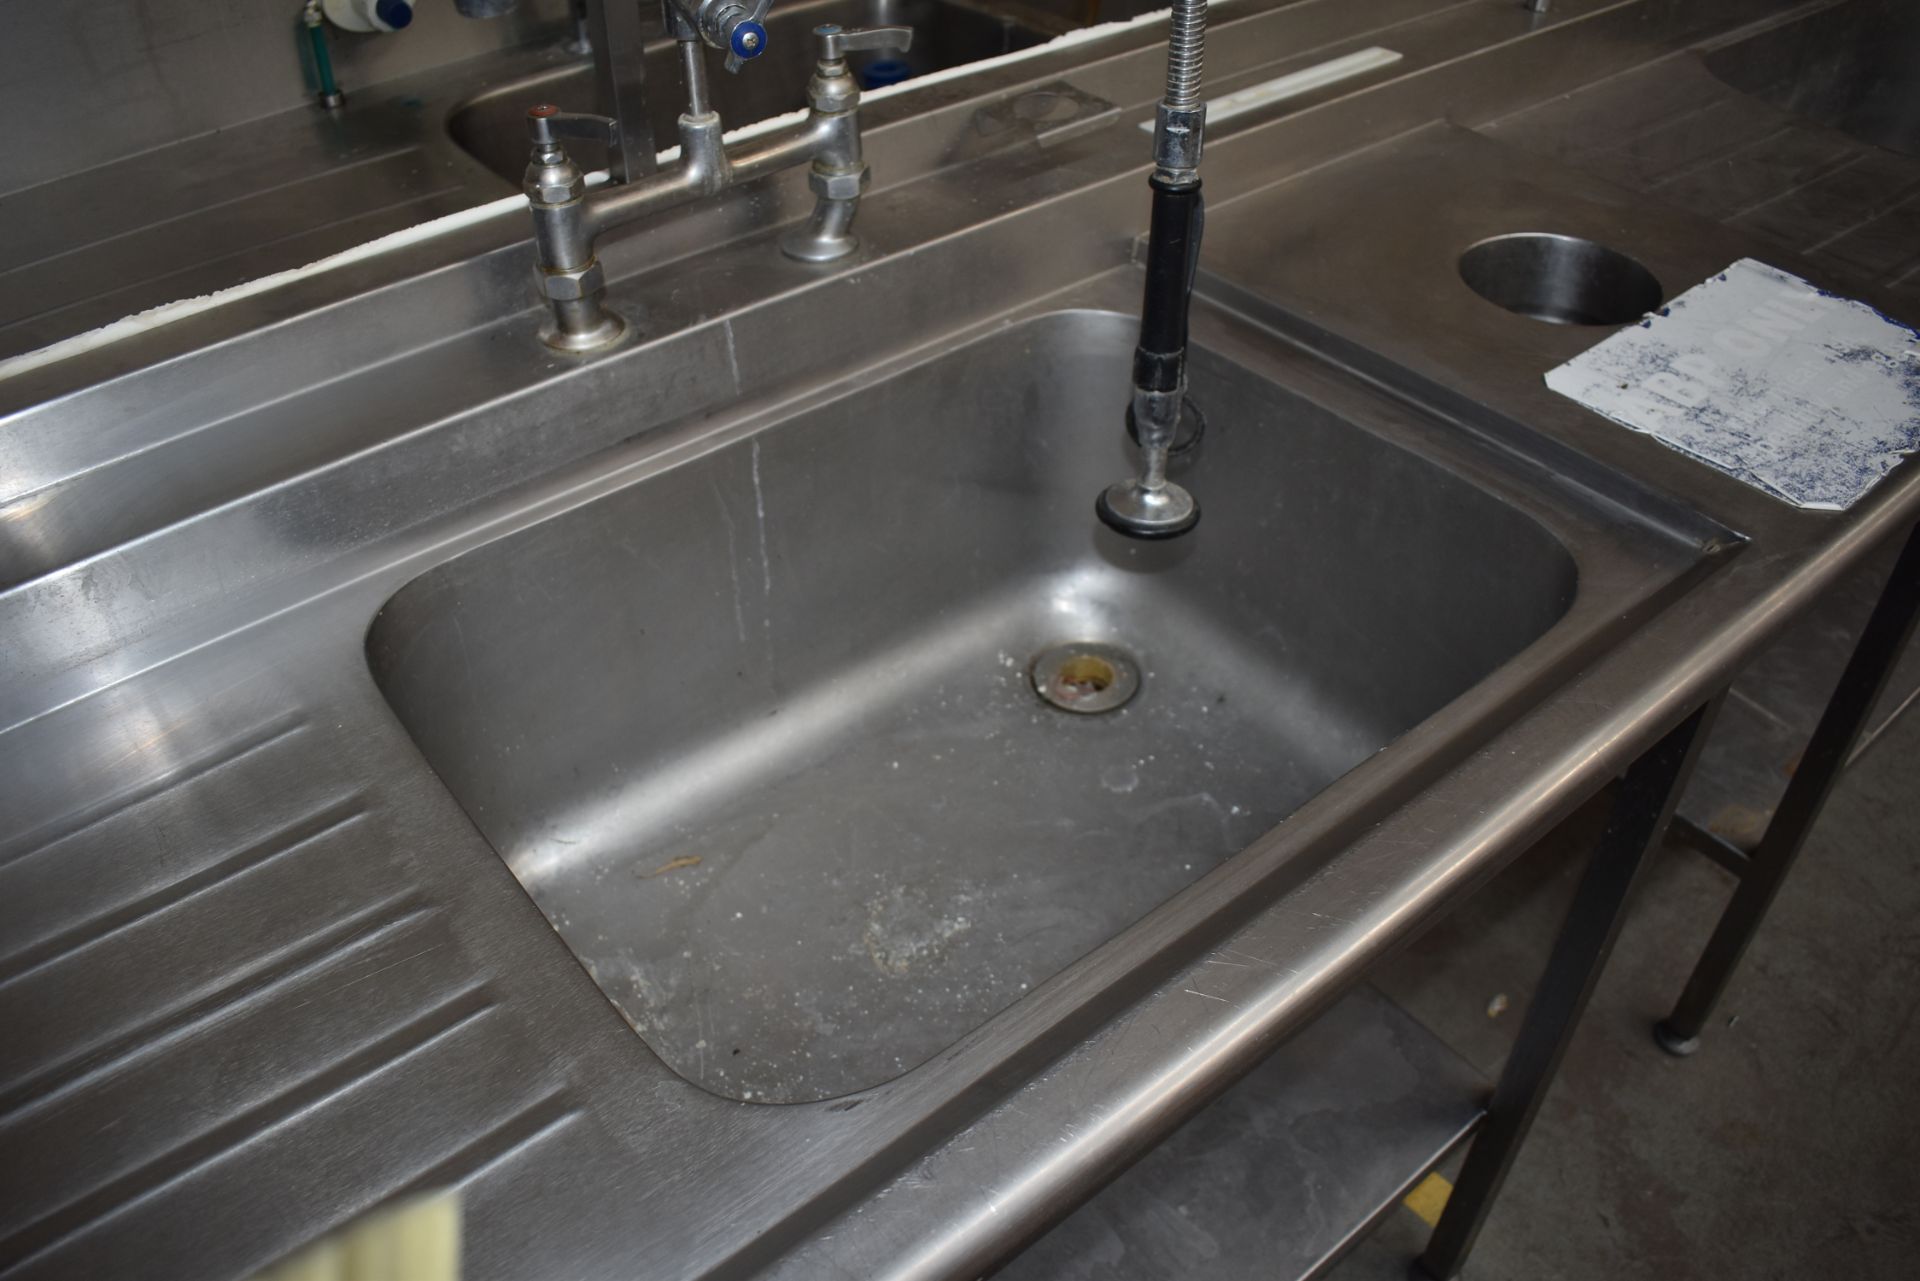 1 x Stainless Steel Commercial Wash Basin Unit With Twin Sink Bowl and Drainers, Mixer Taps, Spray - Image 7 of 12